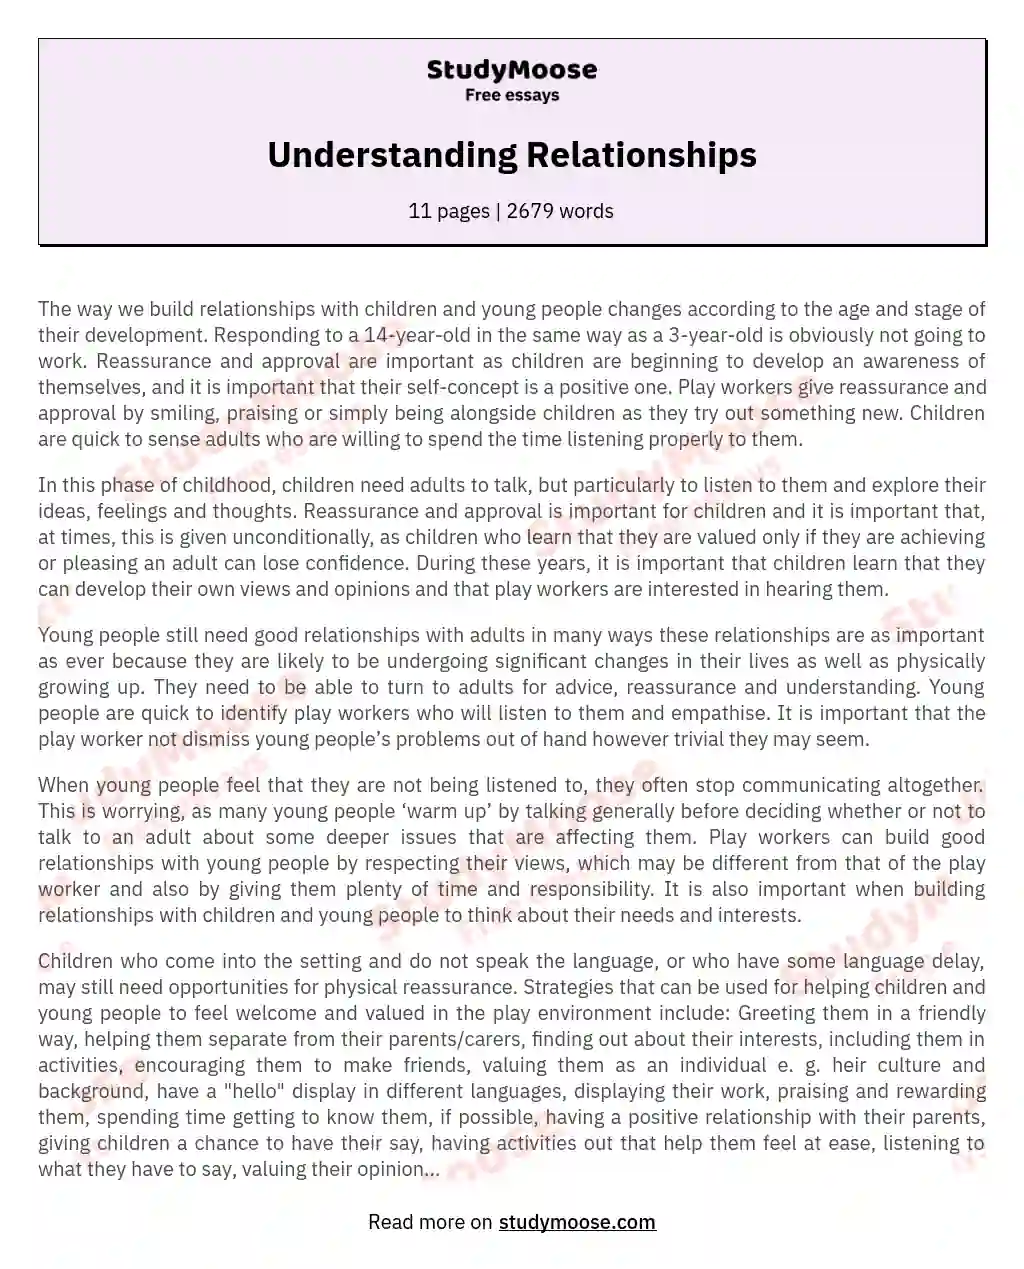 importance of relationship essay